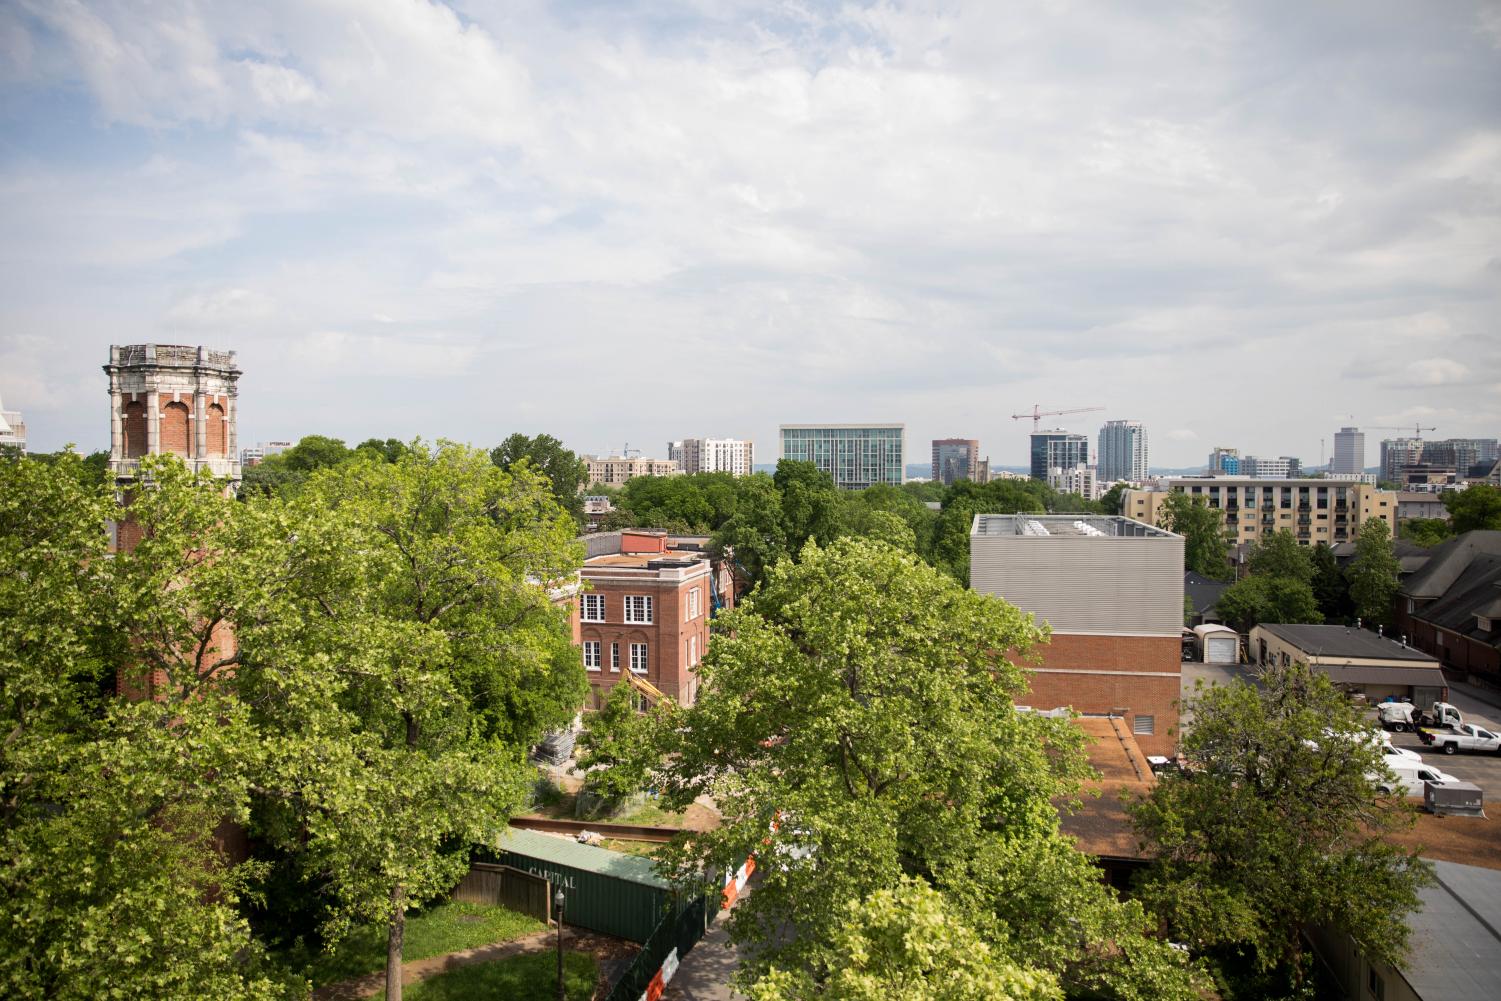 Vanderbilts campus as viewed from above